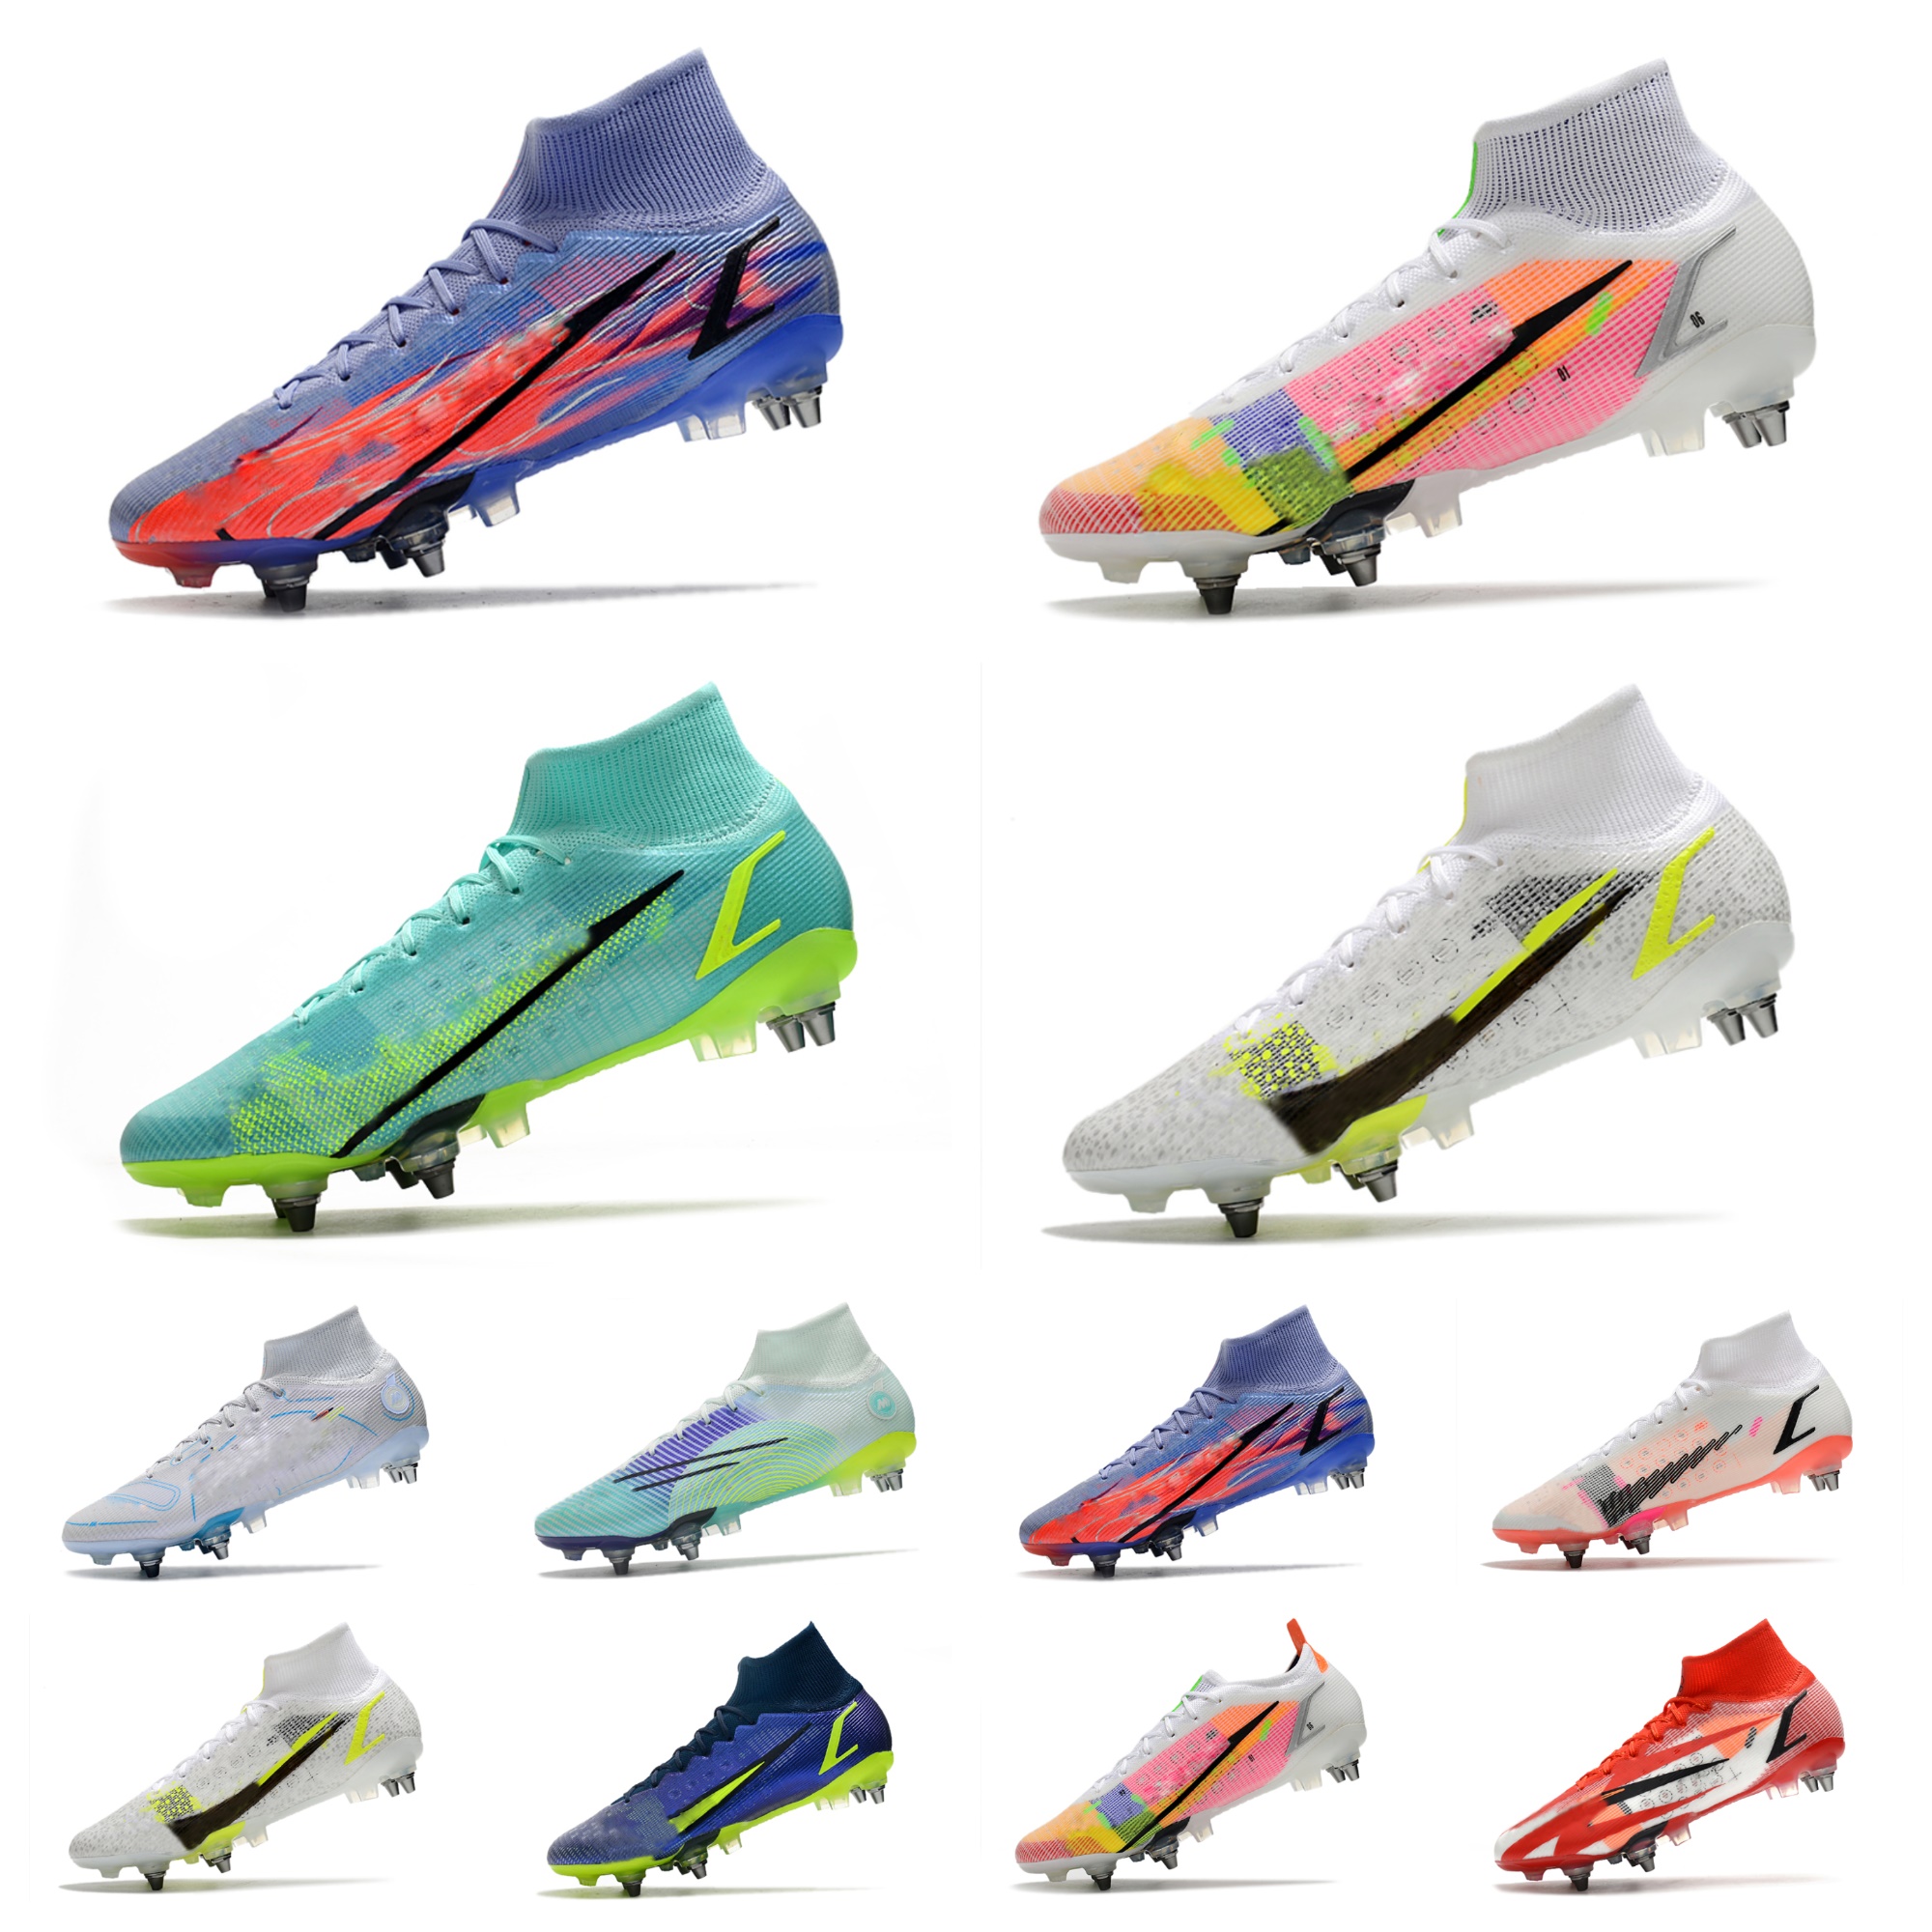 Mercurial Superfly Soccer Shoes Superflys Vapores XIV VIII 8 Elite FG PRO Anti Clog Dream Speed Dynamic Turquoise Lime Glow Volt Black Bright Crimson Football Boots